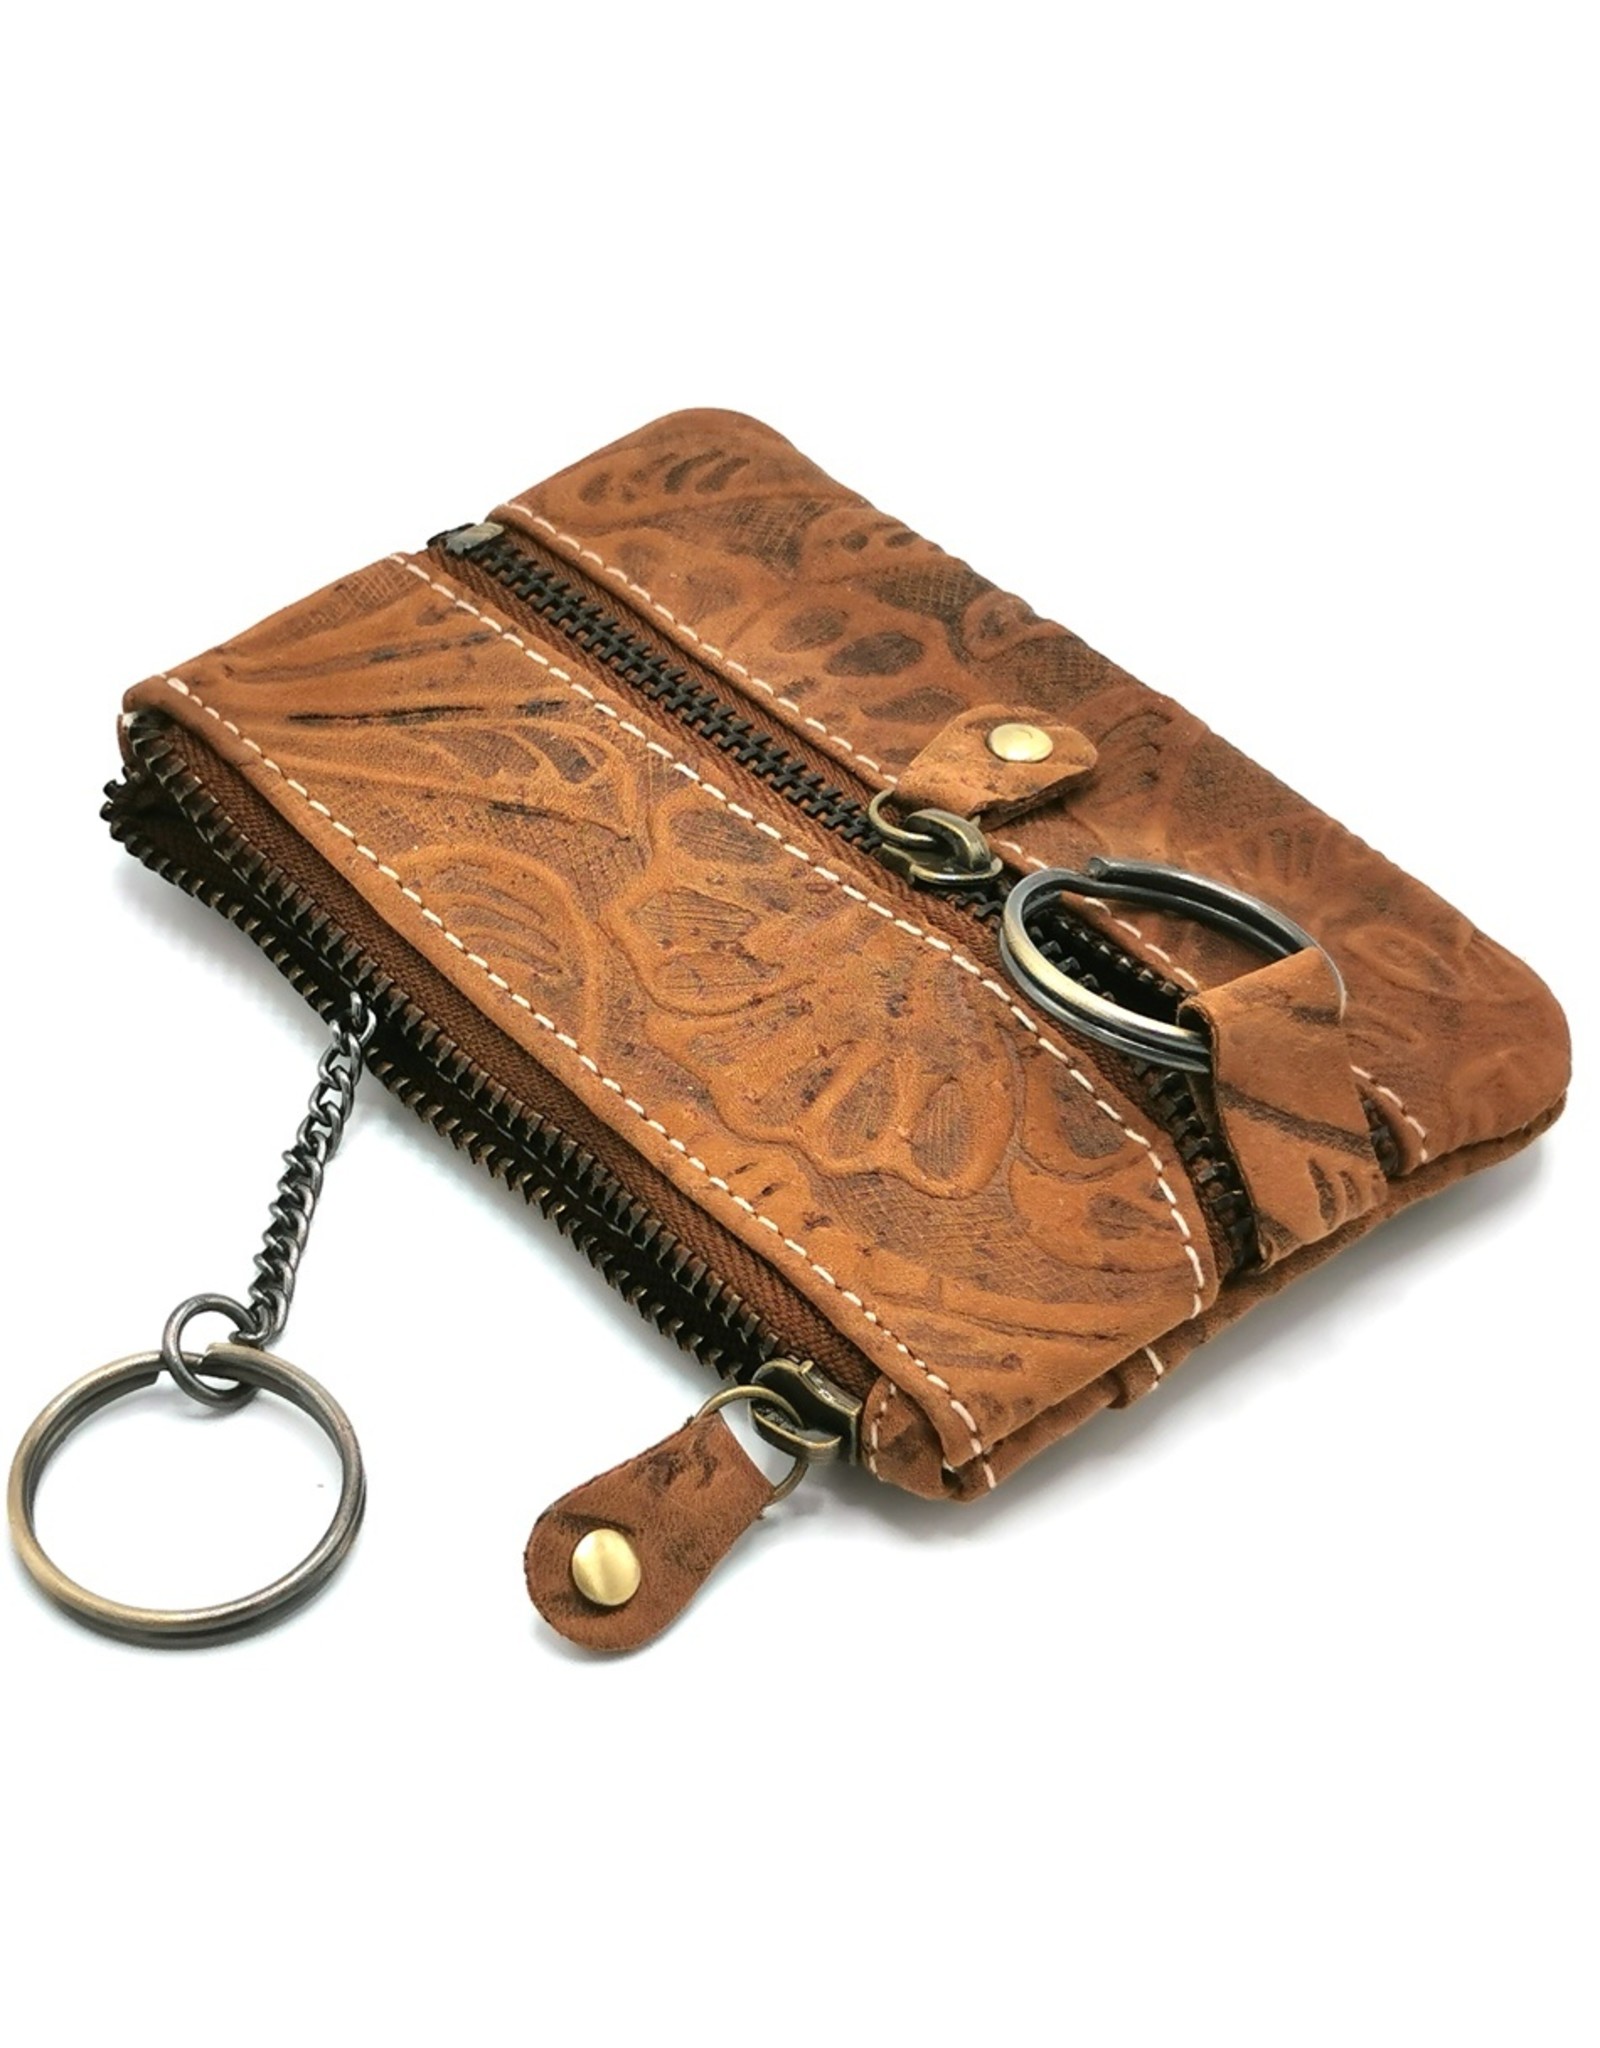 HillBurry Leather Wallets -  Leather key case with embossed flowers (tan)